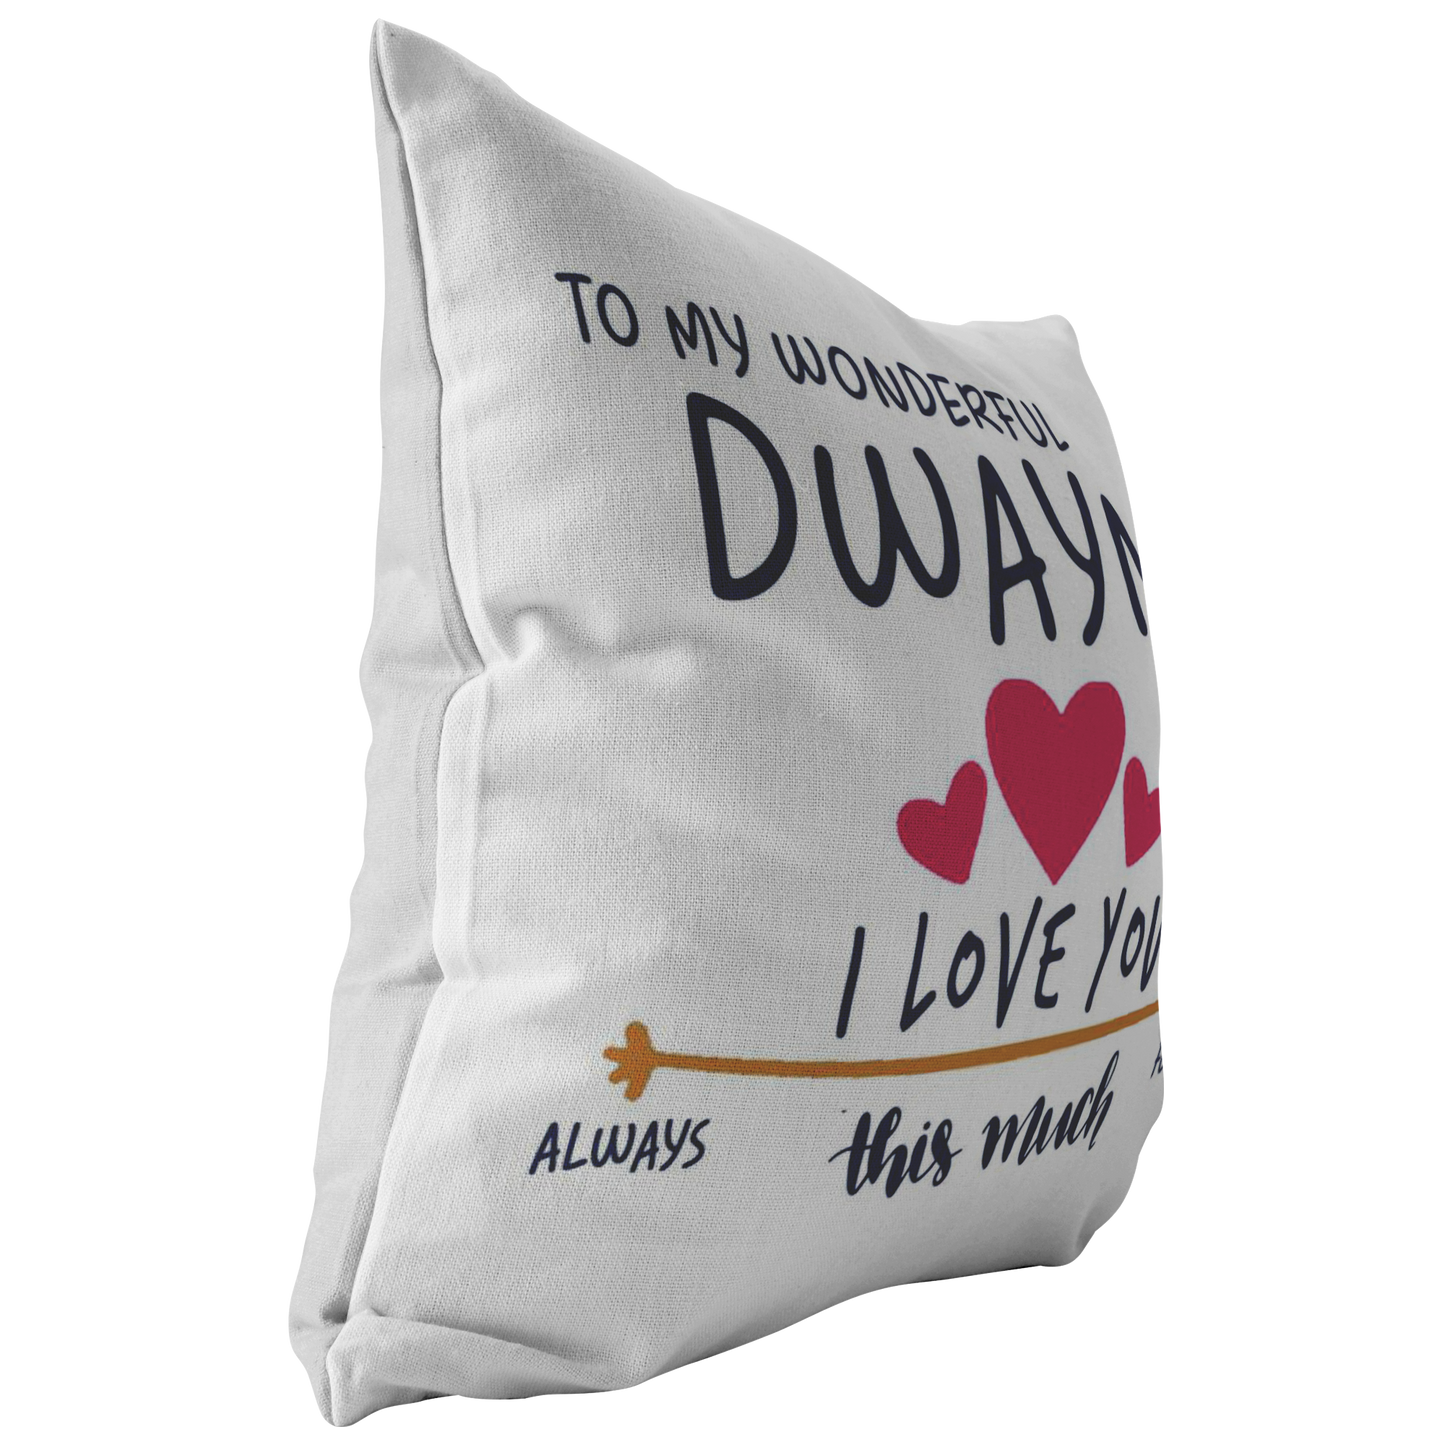 PL-21252414-sp-32819 - [ Dwayne | 1 | 1 ] (PI_ThrowPillowCovers) Valentines Day Pillow Covers 18x18 - to My Wonderful Dwayne